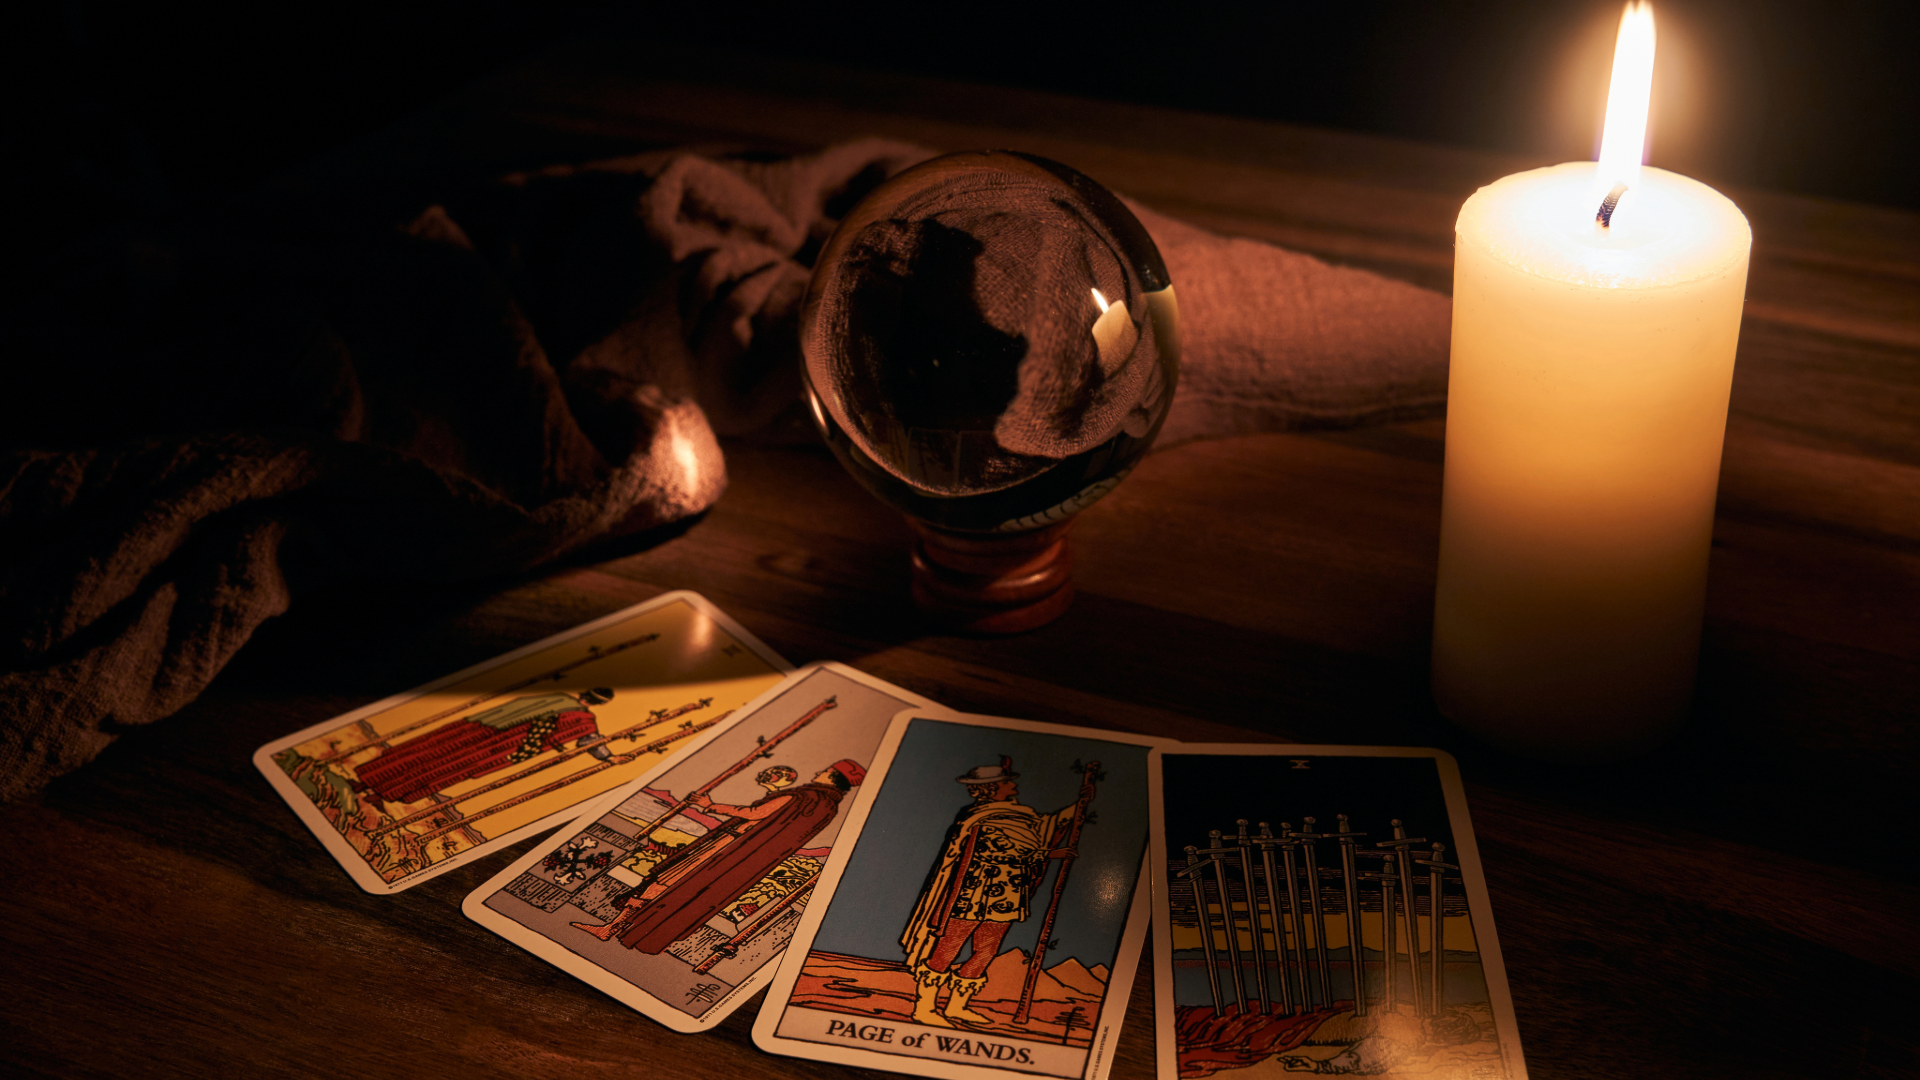 Yoga and Tarot and Ouija, Oh My!